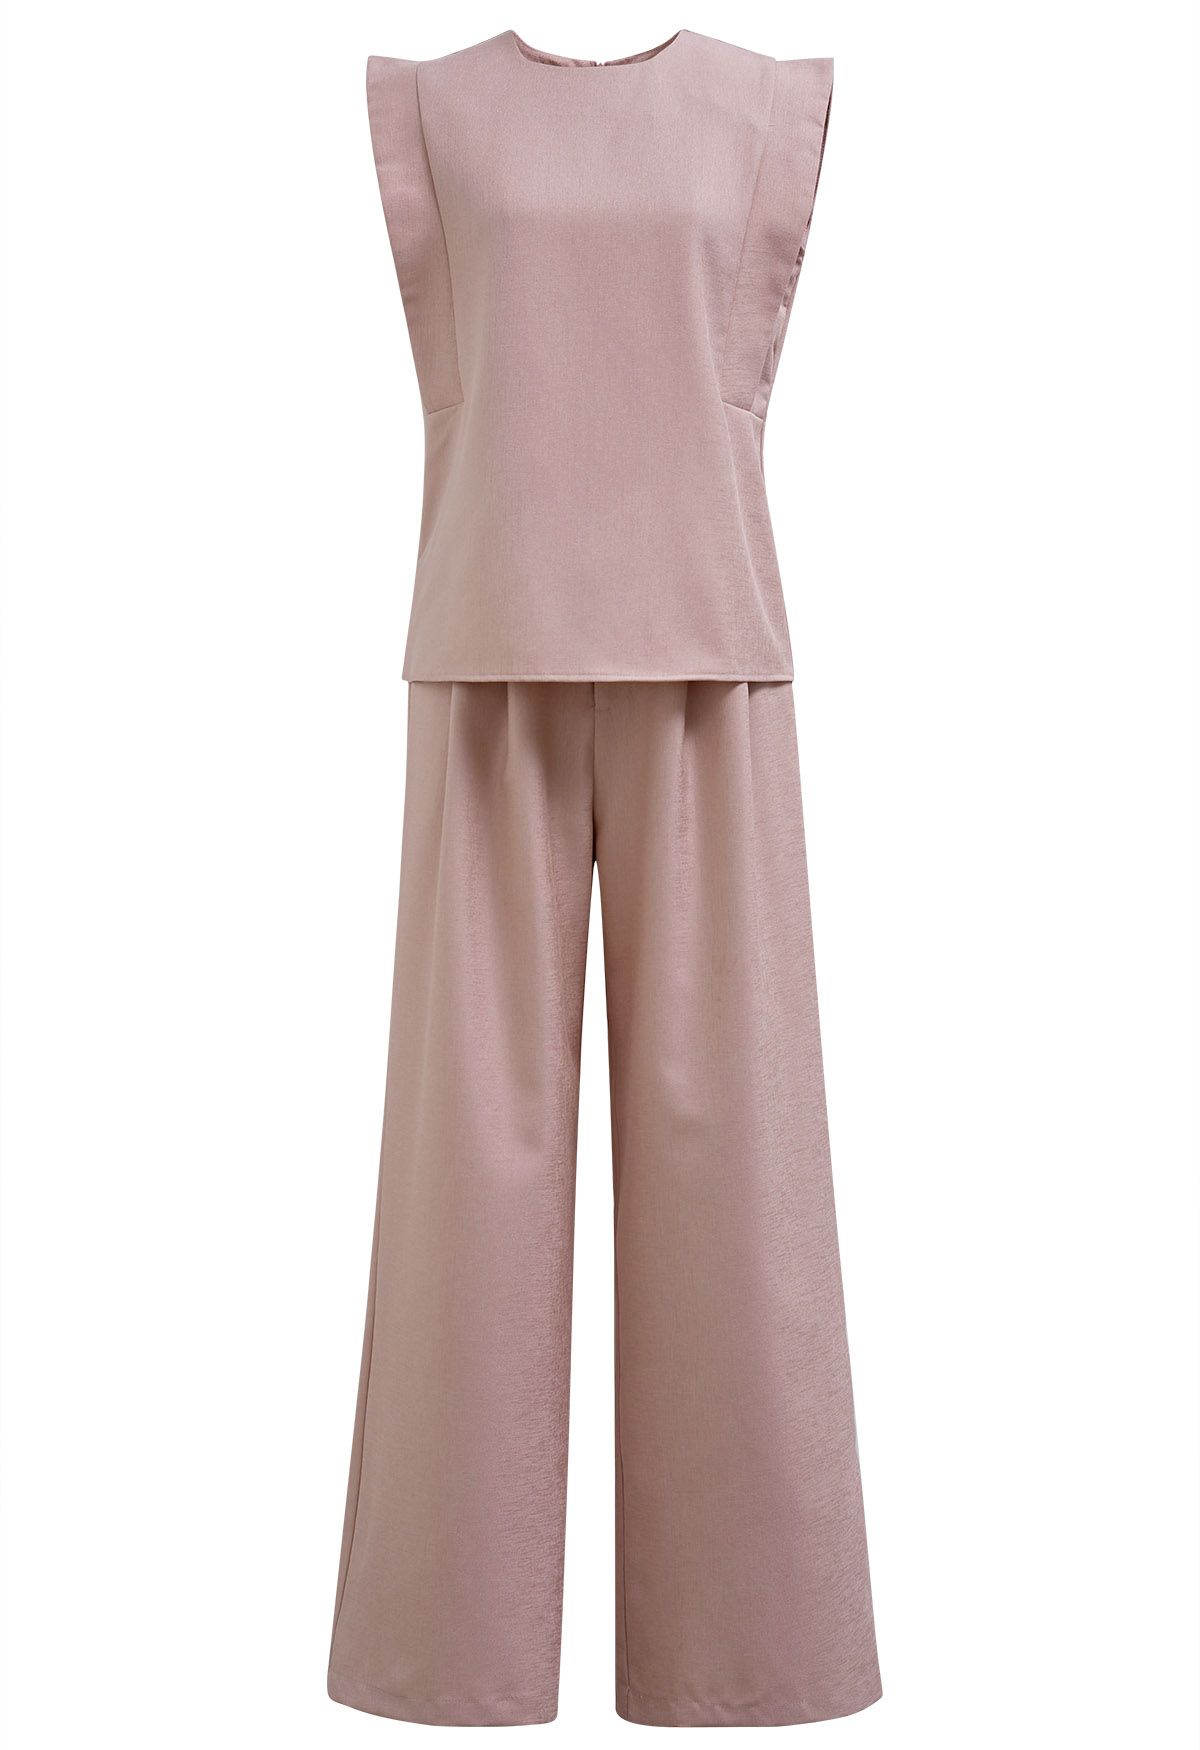 Chic Sleeveless Top and Flowy Wide-Leg Pants Set in Pink